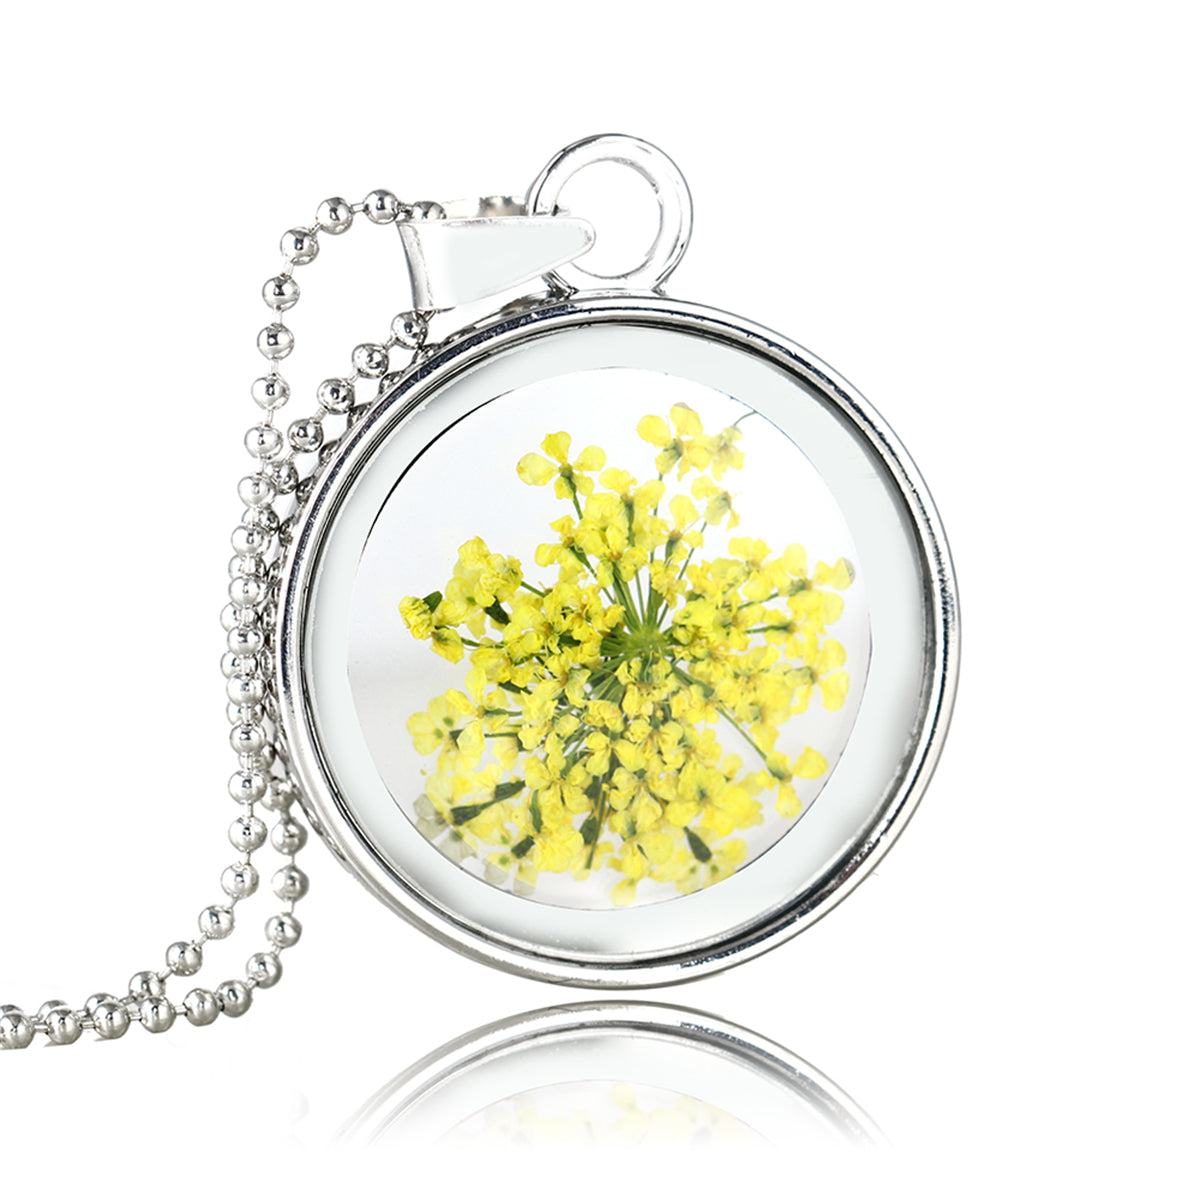 Yellow Gypsophila & Silver-Plated Resin Round Pendant Necklace